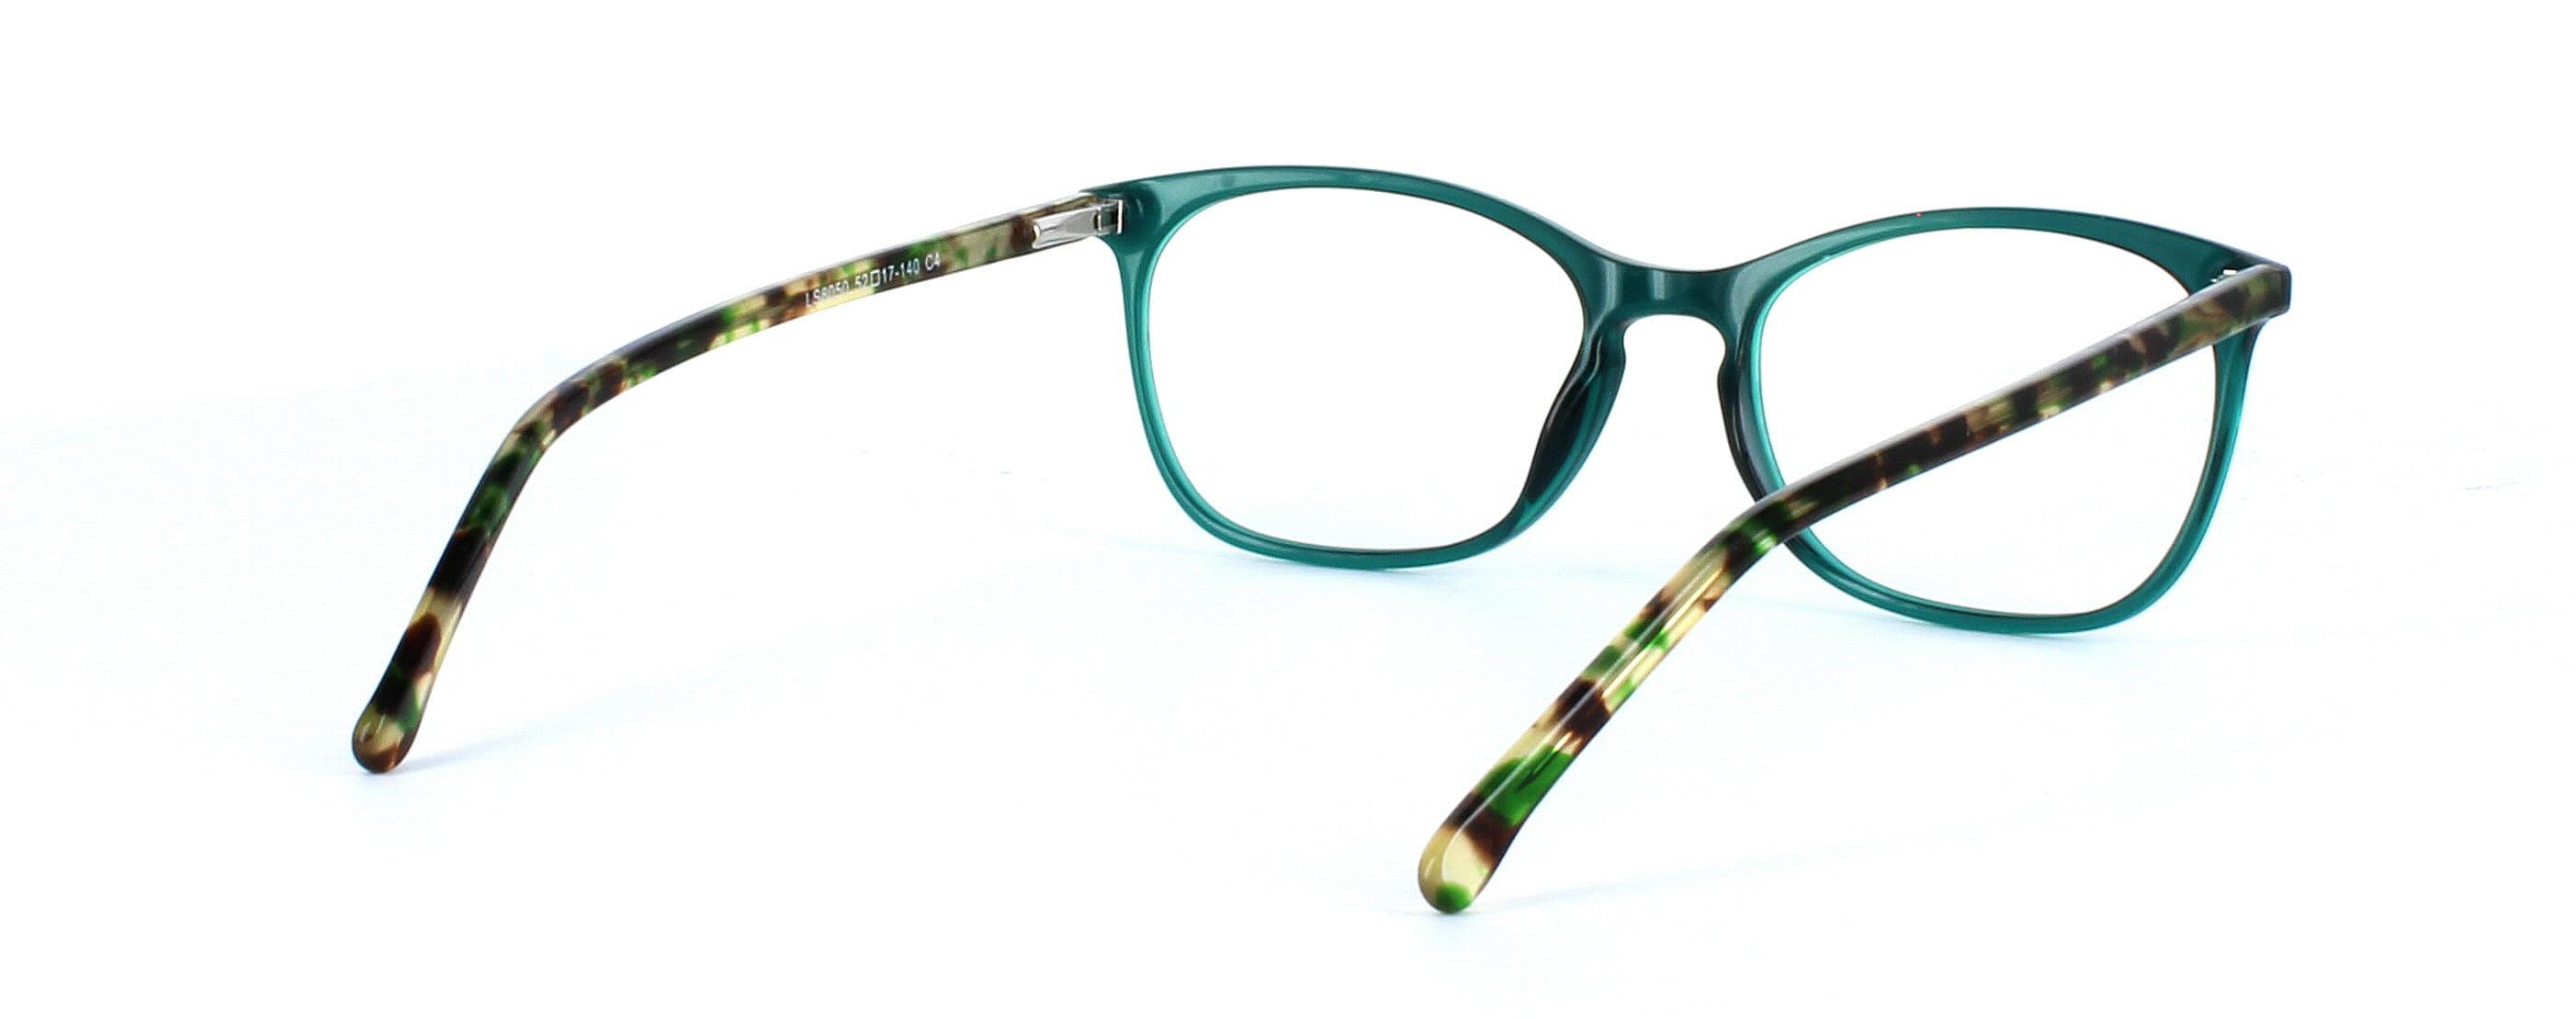 Hackleton - Ladies crystal green plastic glasses with mottled sprung hinge arms - image view 4